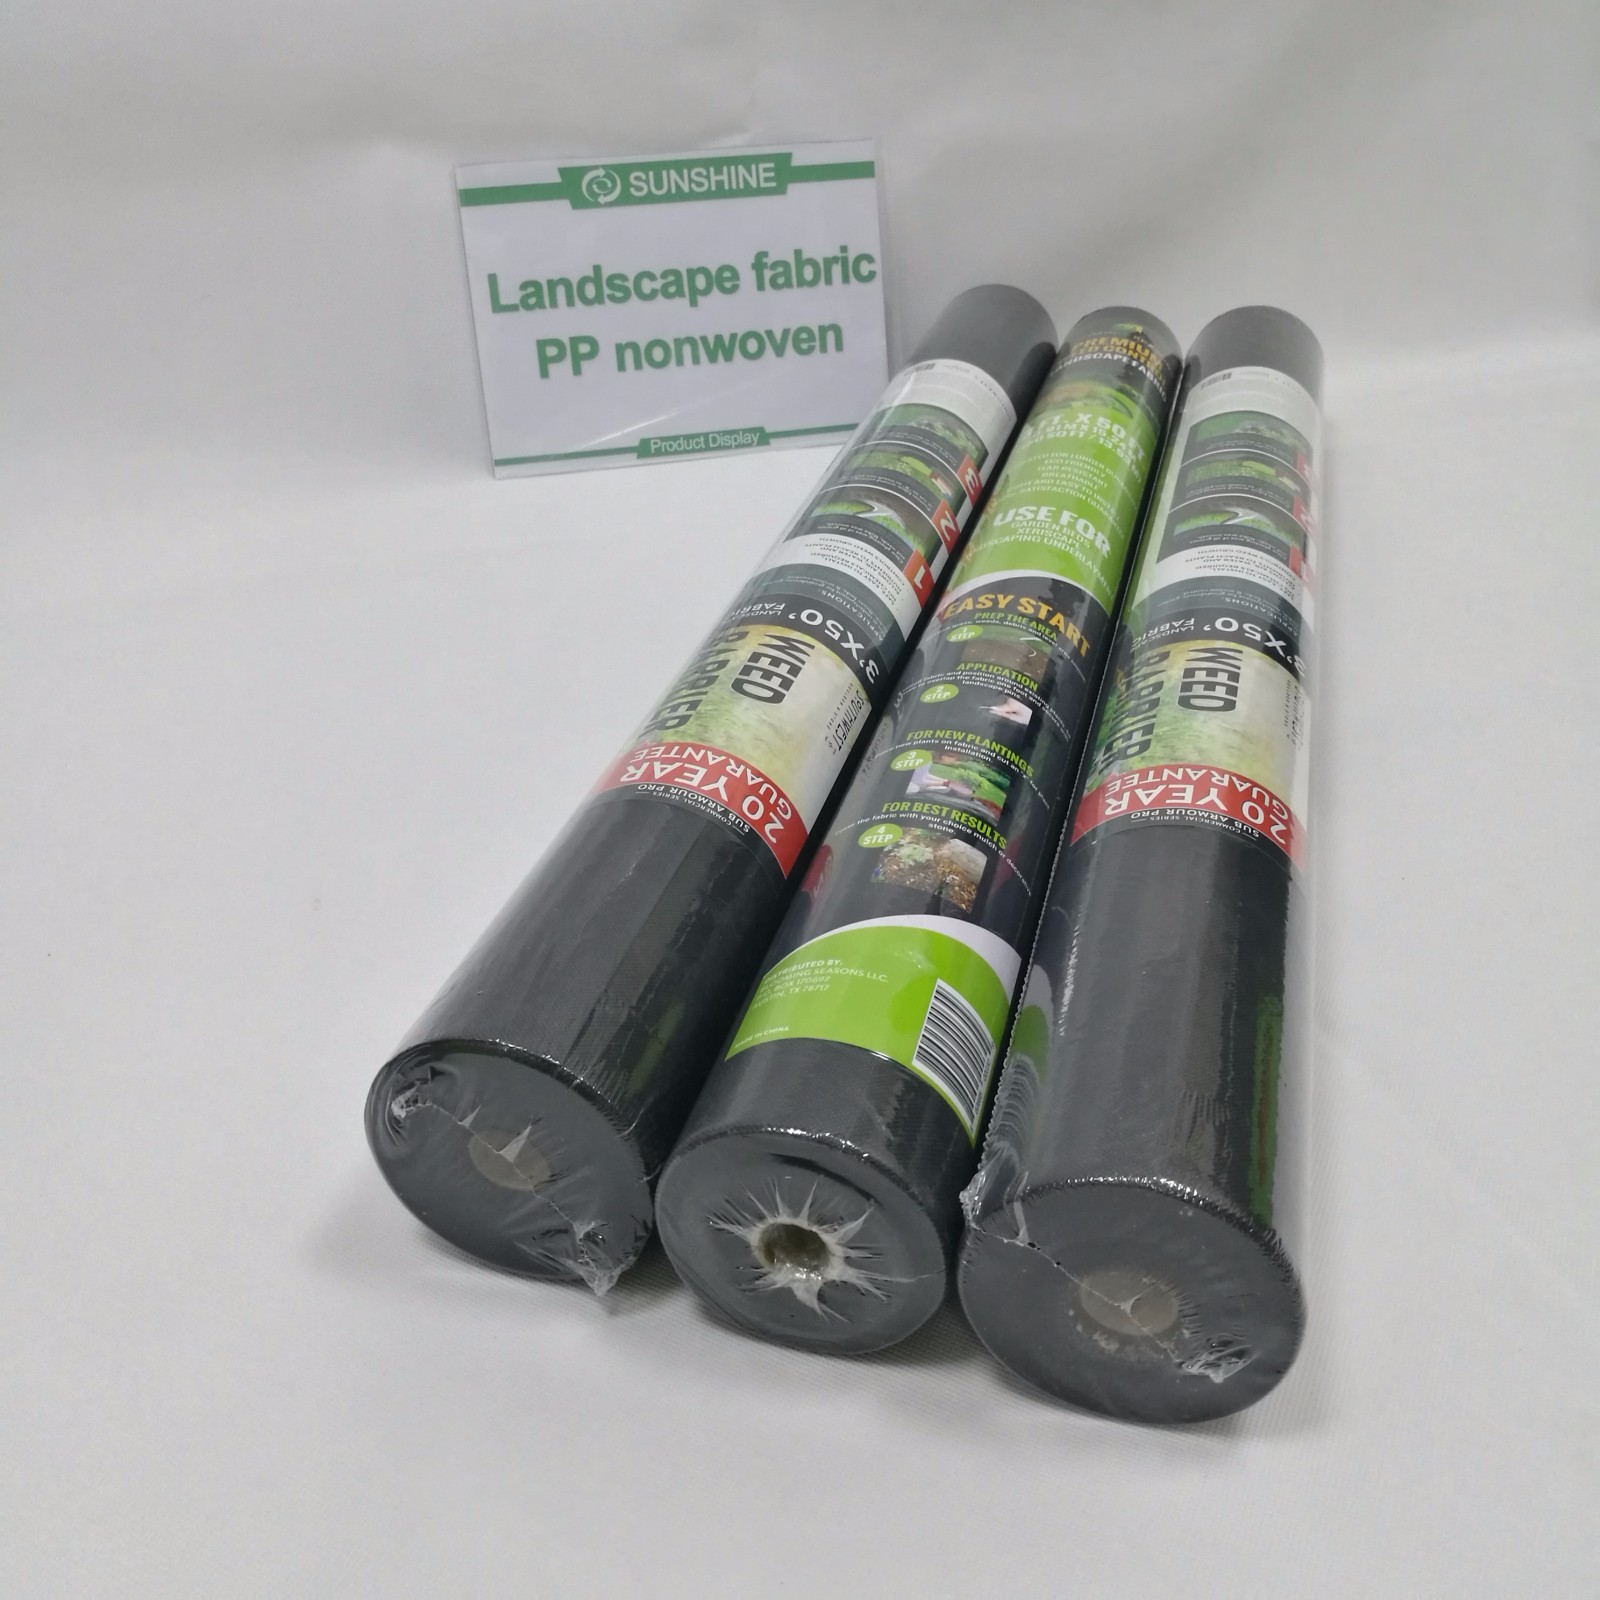 Biodegradable Landscape Fabric In Non Woven Polypropylene Fabric